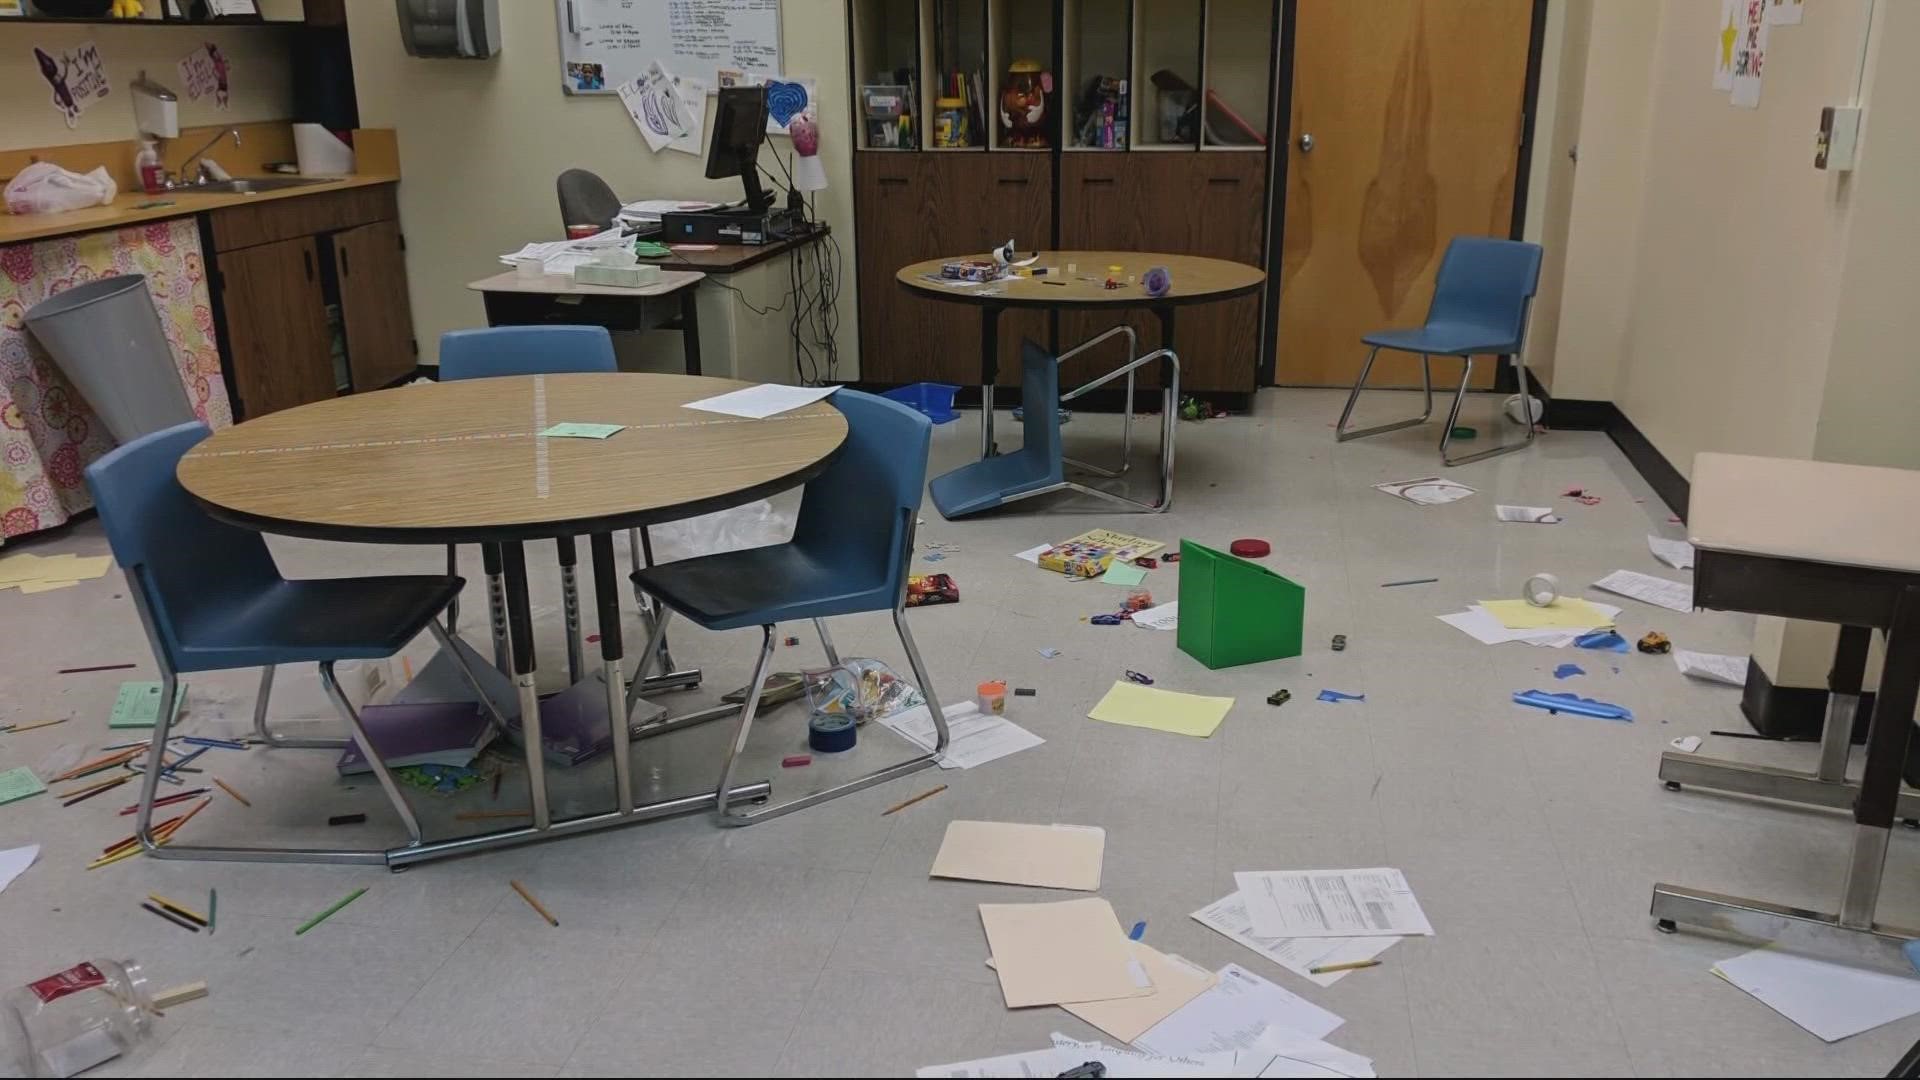 KGW spoke to Salem-Keizer educators, both former and current, who said they’re concerned about the violence and disruption happening too often at school this year.